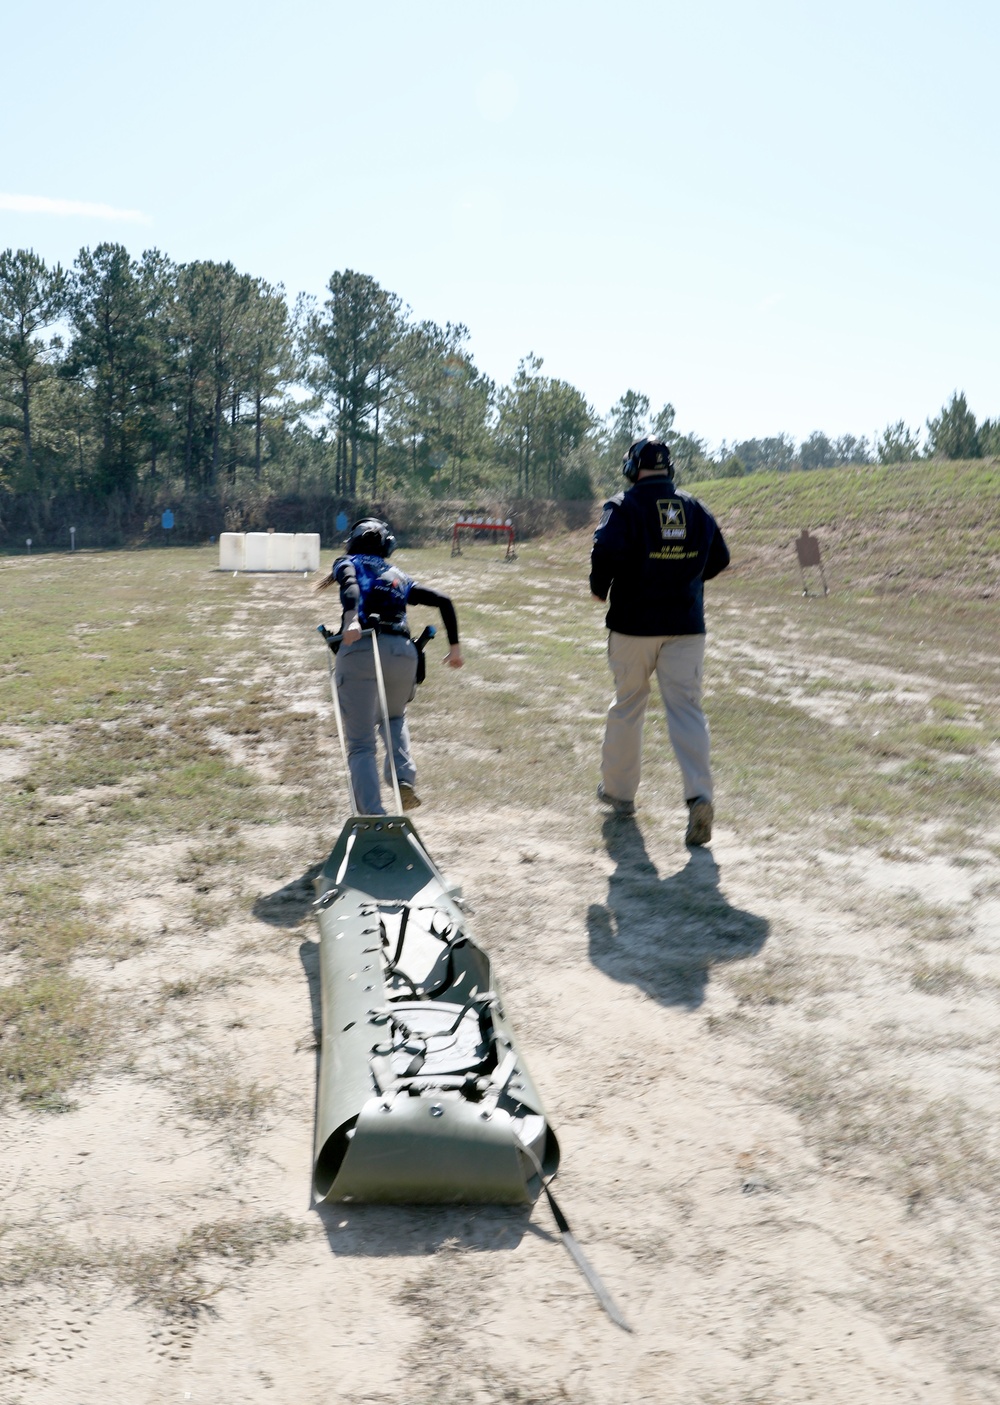 Civilians compete at multigun competition on Fort Benning